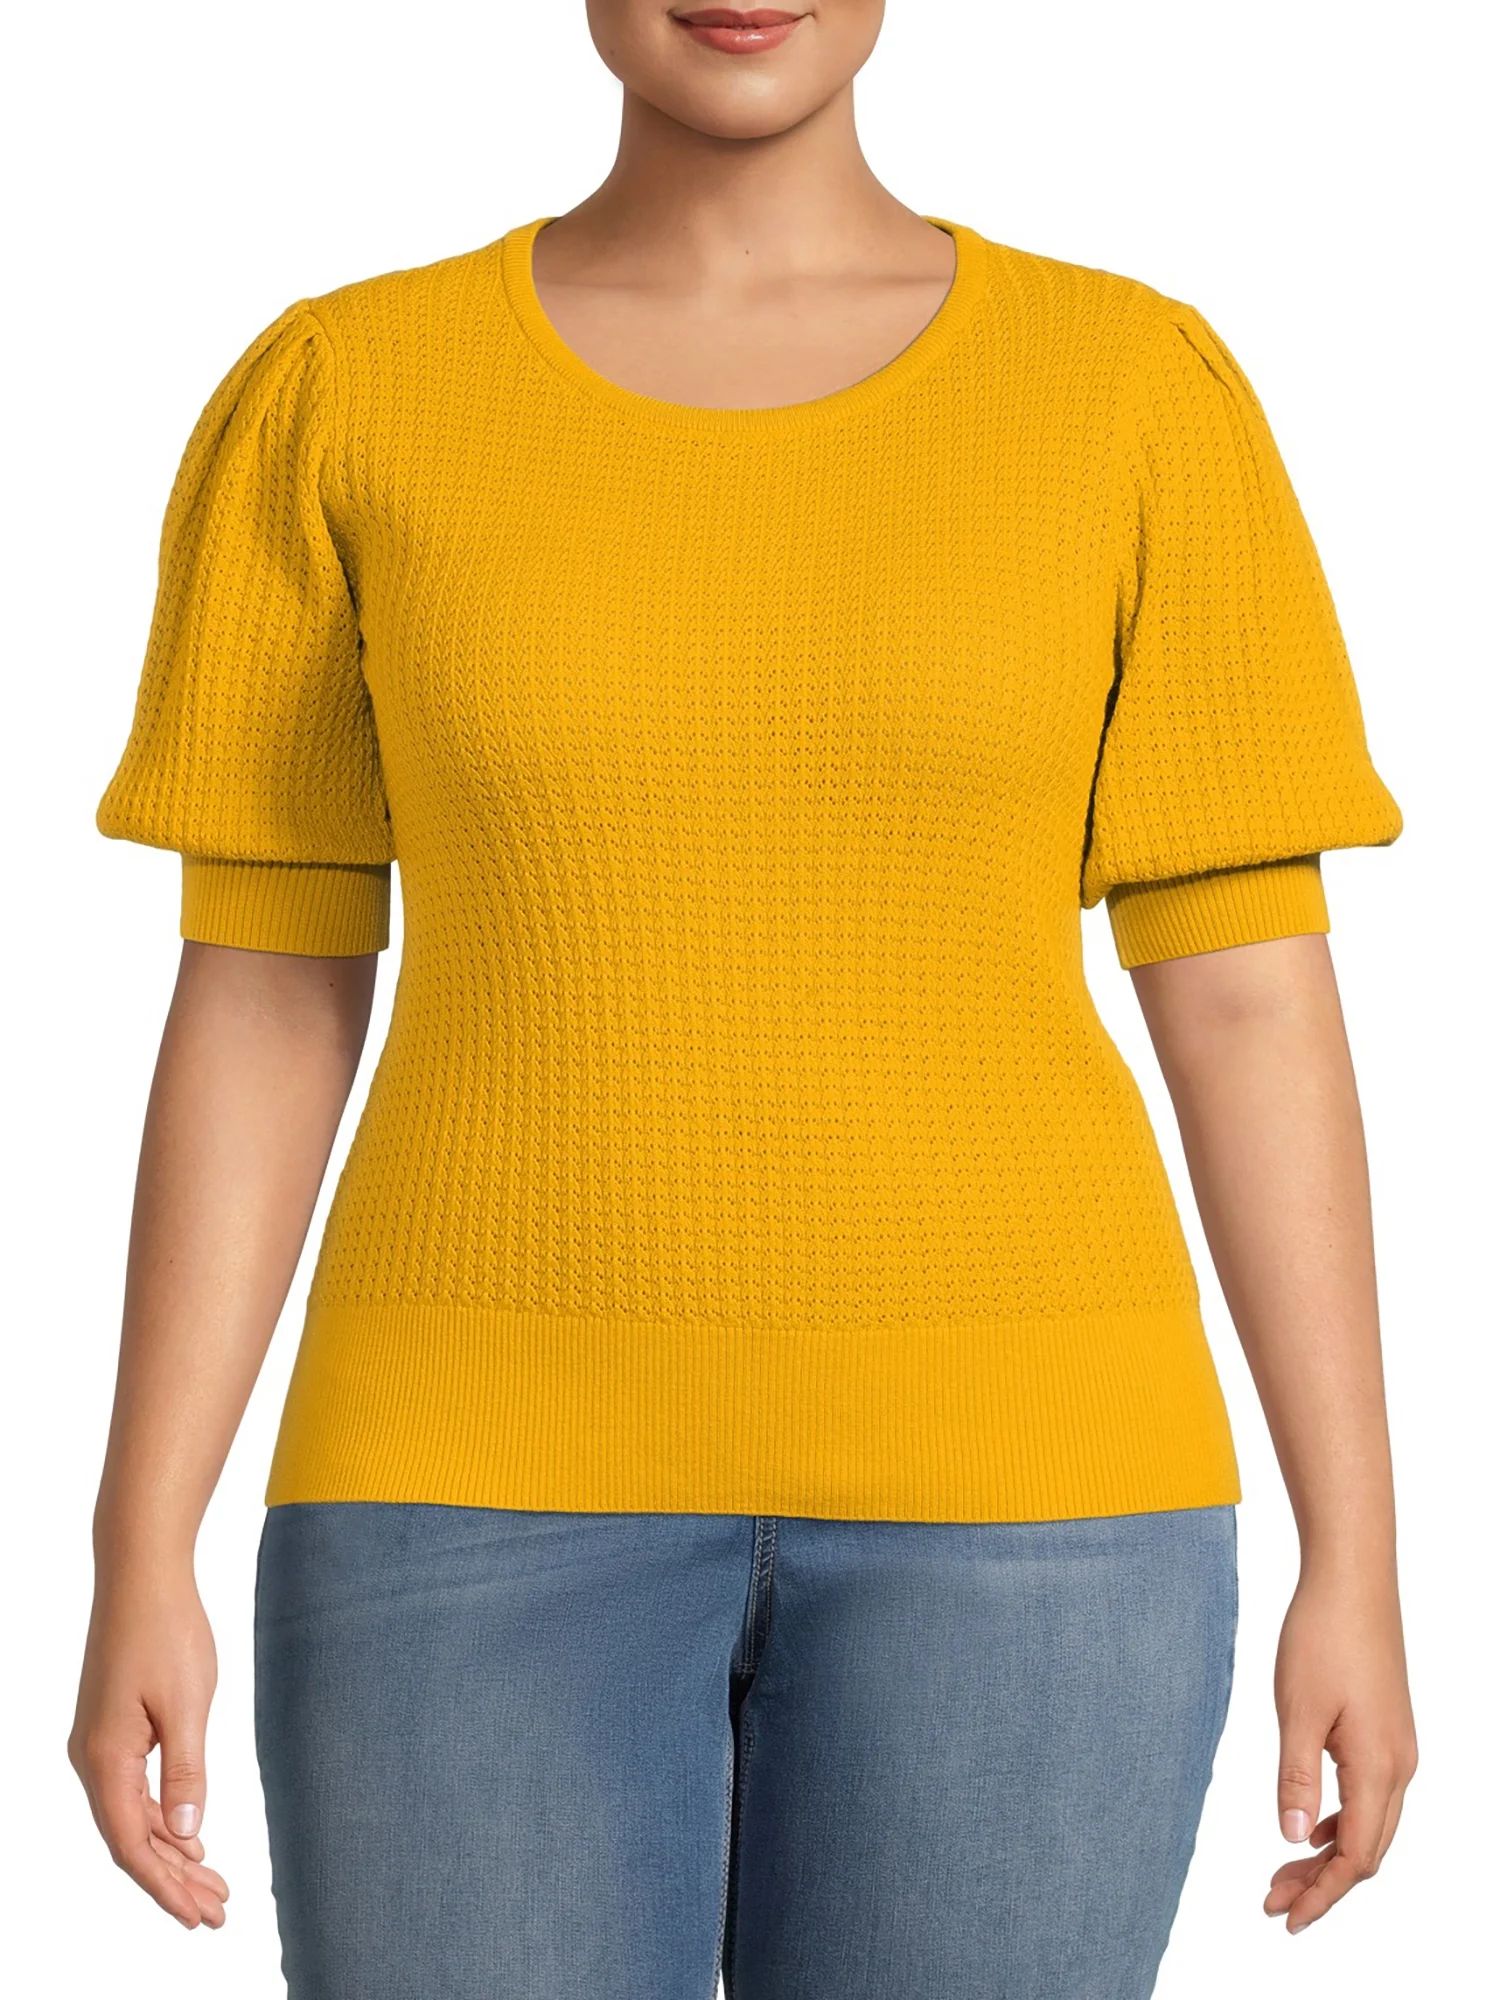 Terra & Sky Short Sleeve Pullover Relaxed Fit Top (Women's Plus) 1 Pack | Walmart (US)